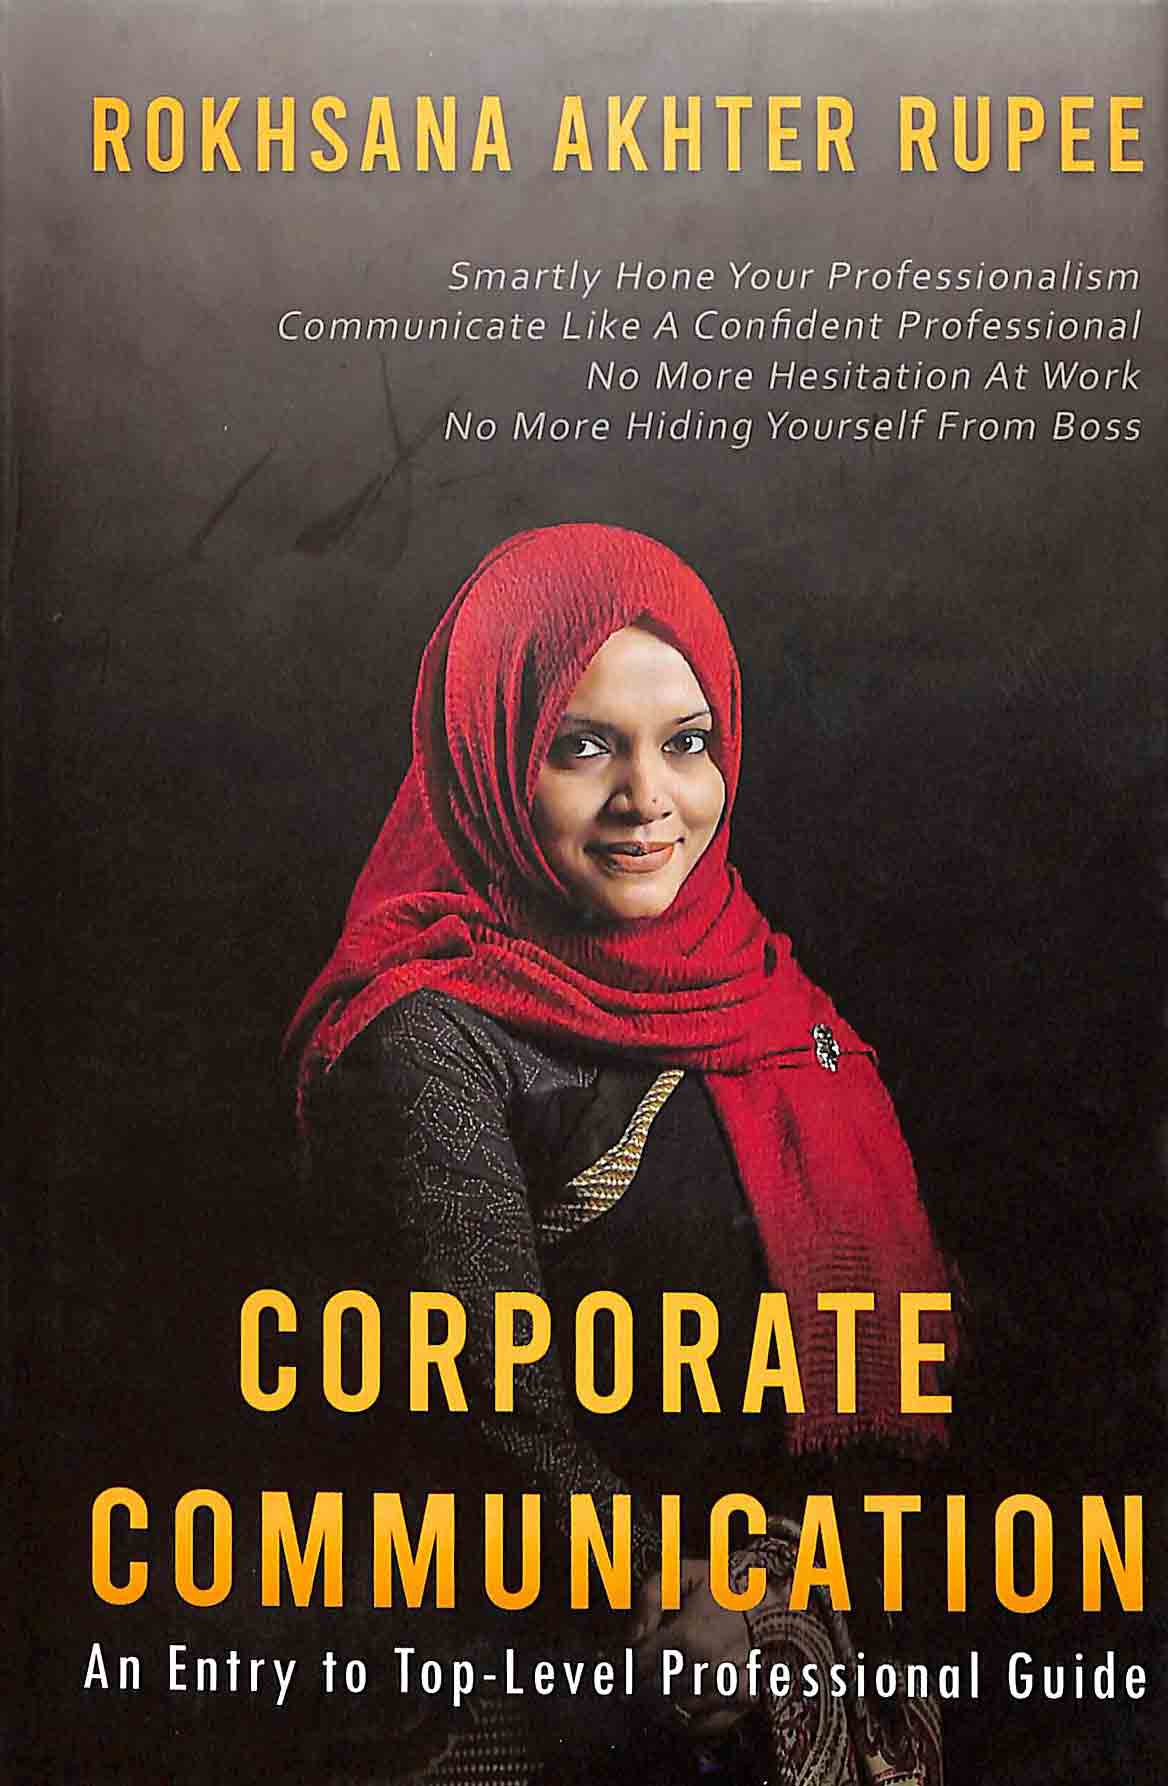 Corporate Communication (An Entry to top-Level Professional Guide)